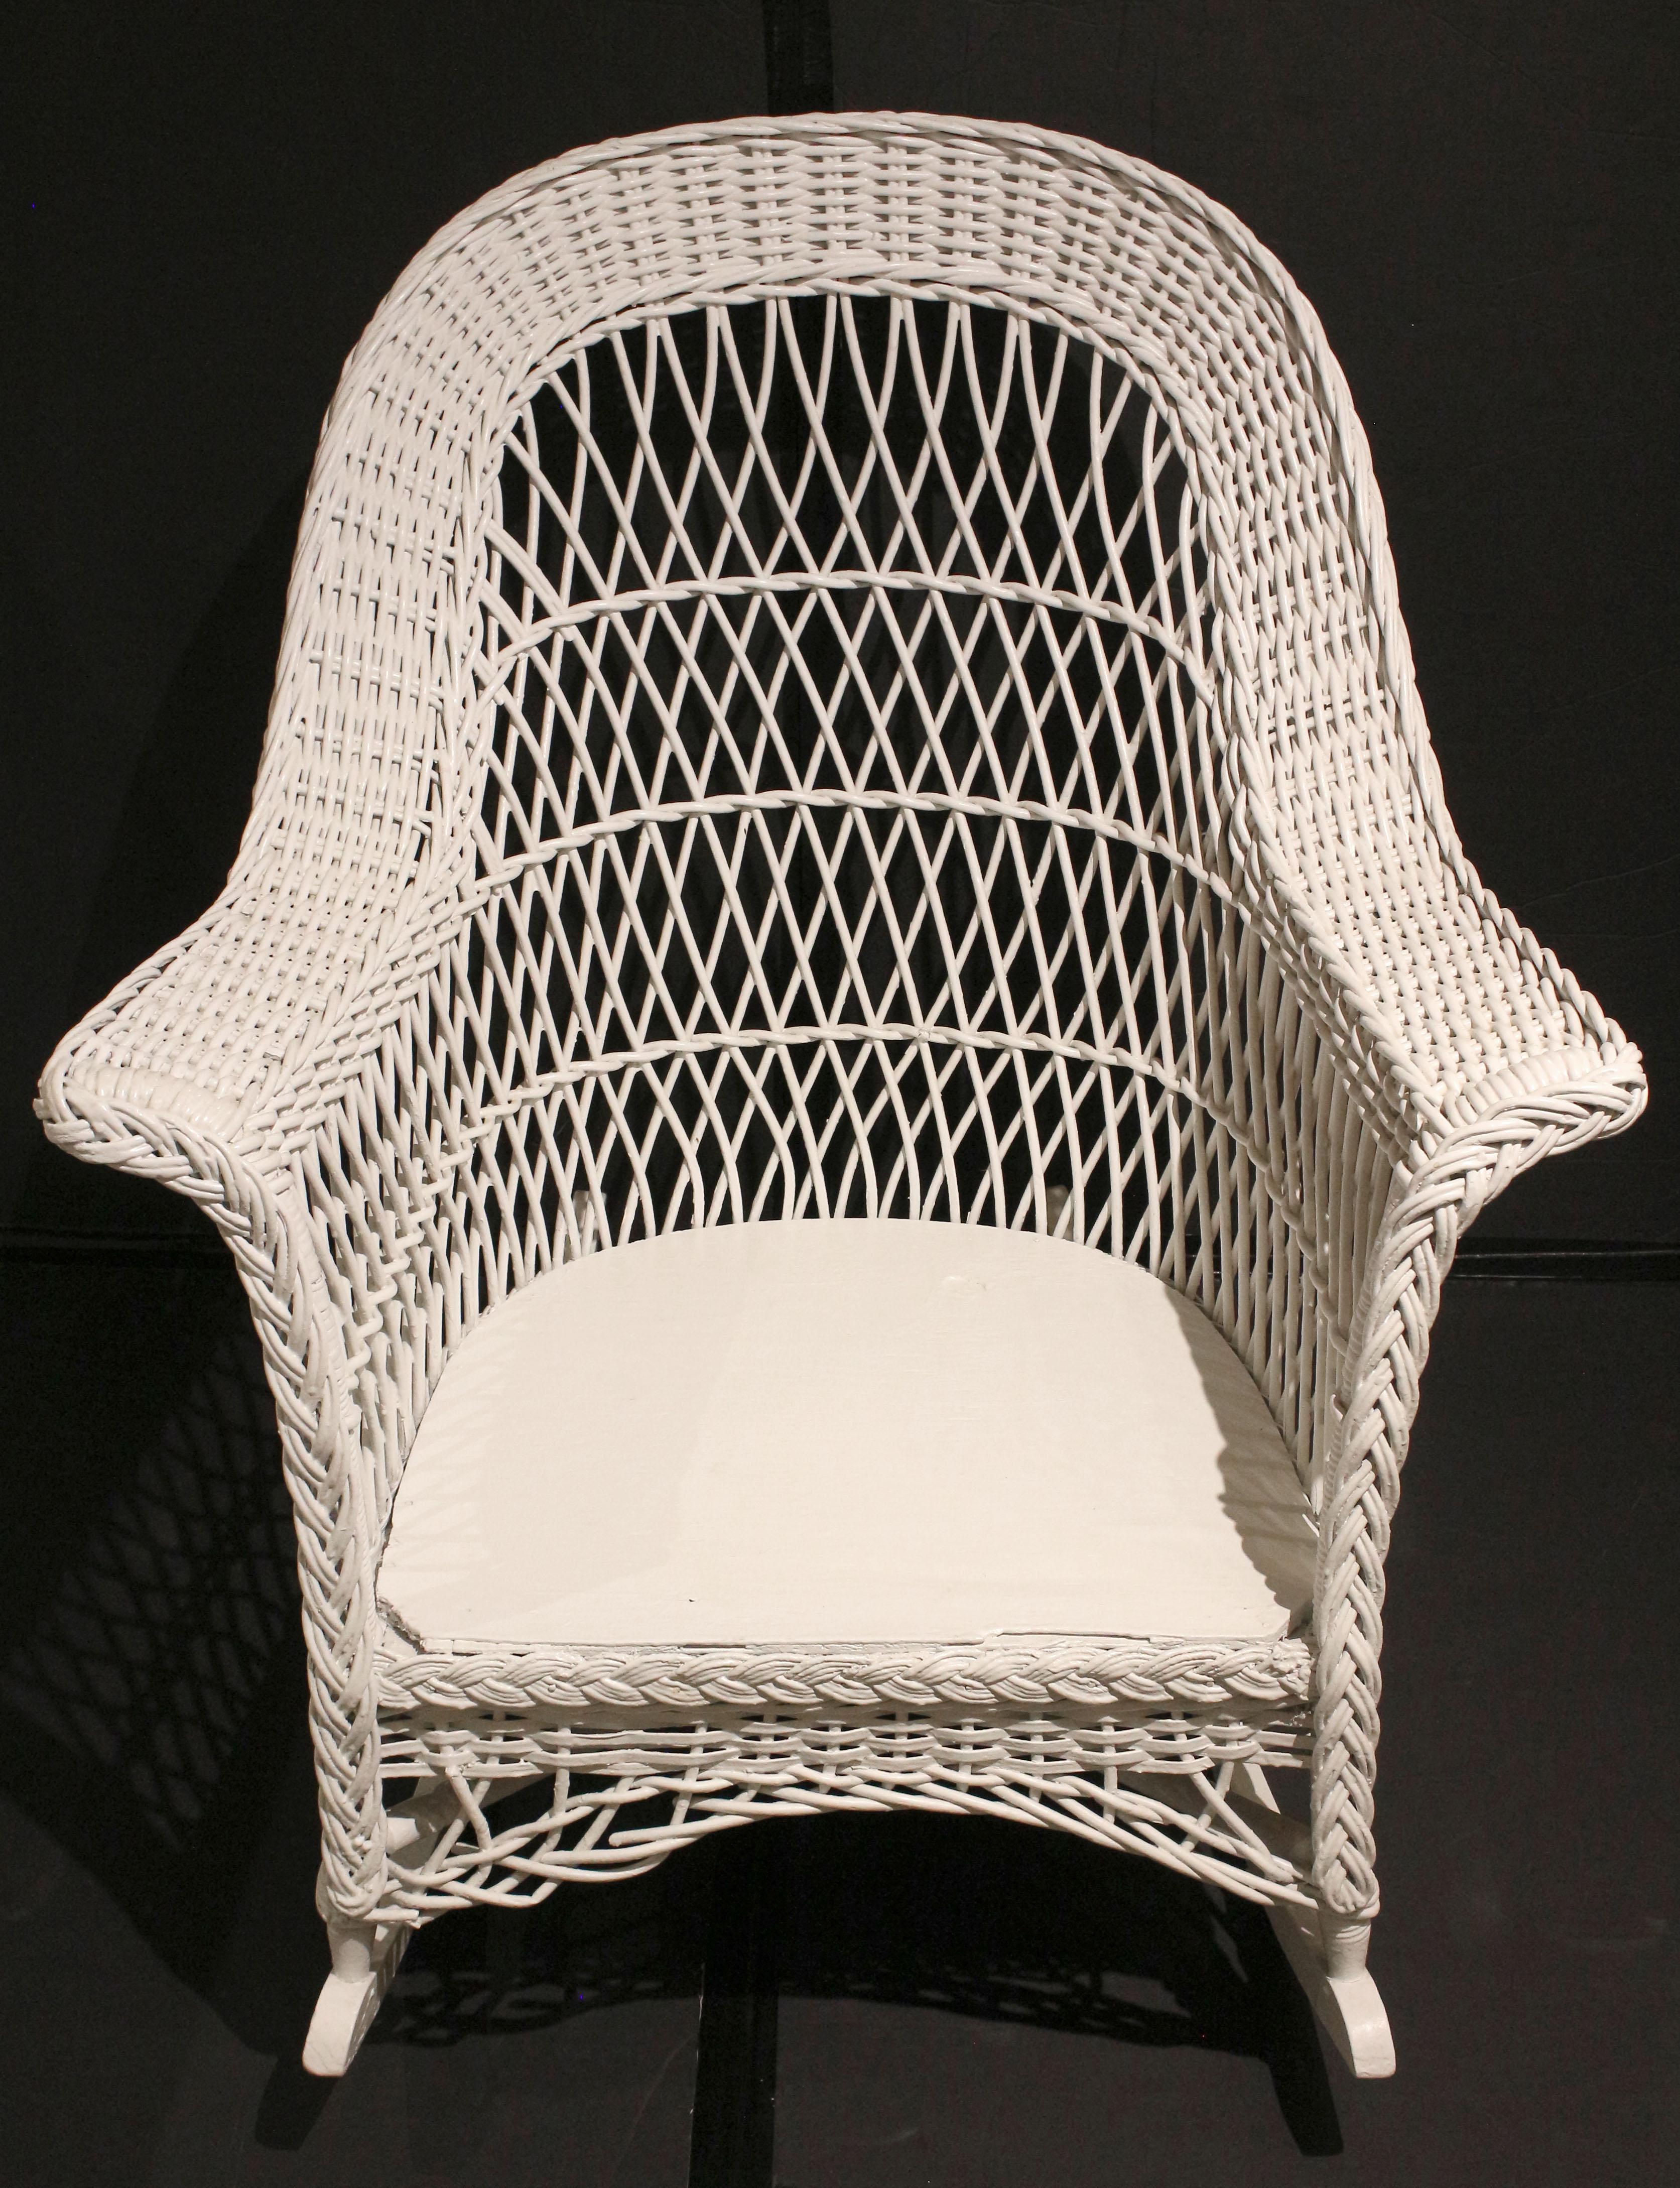 Early 20th Century Heywood-Wakefield Bar Harbor Wicker Rocking Chair For Sale 6